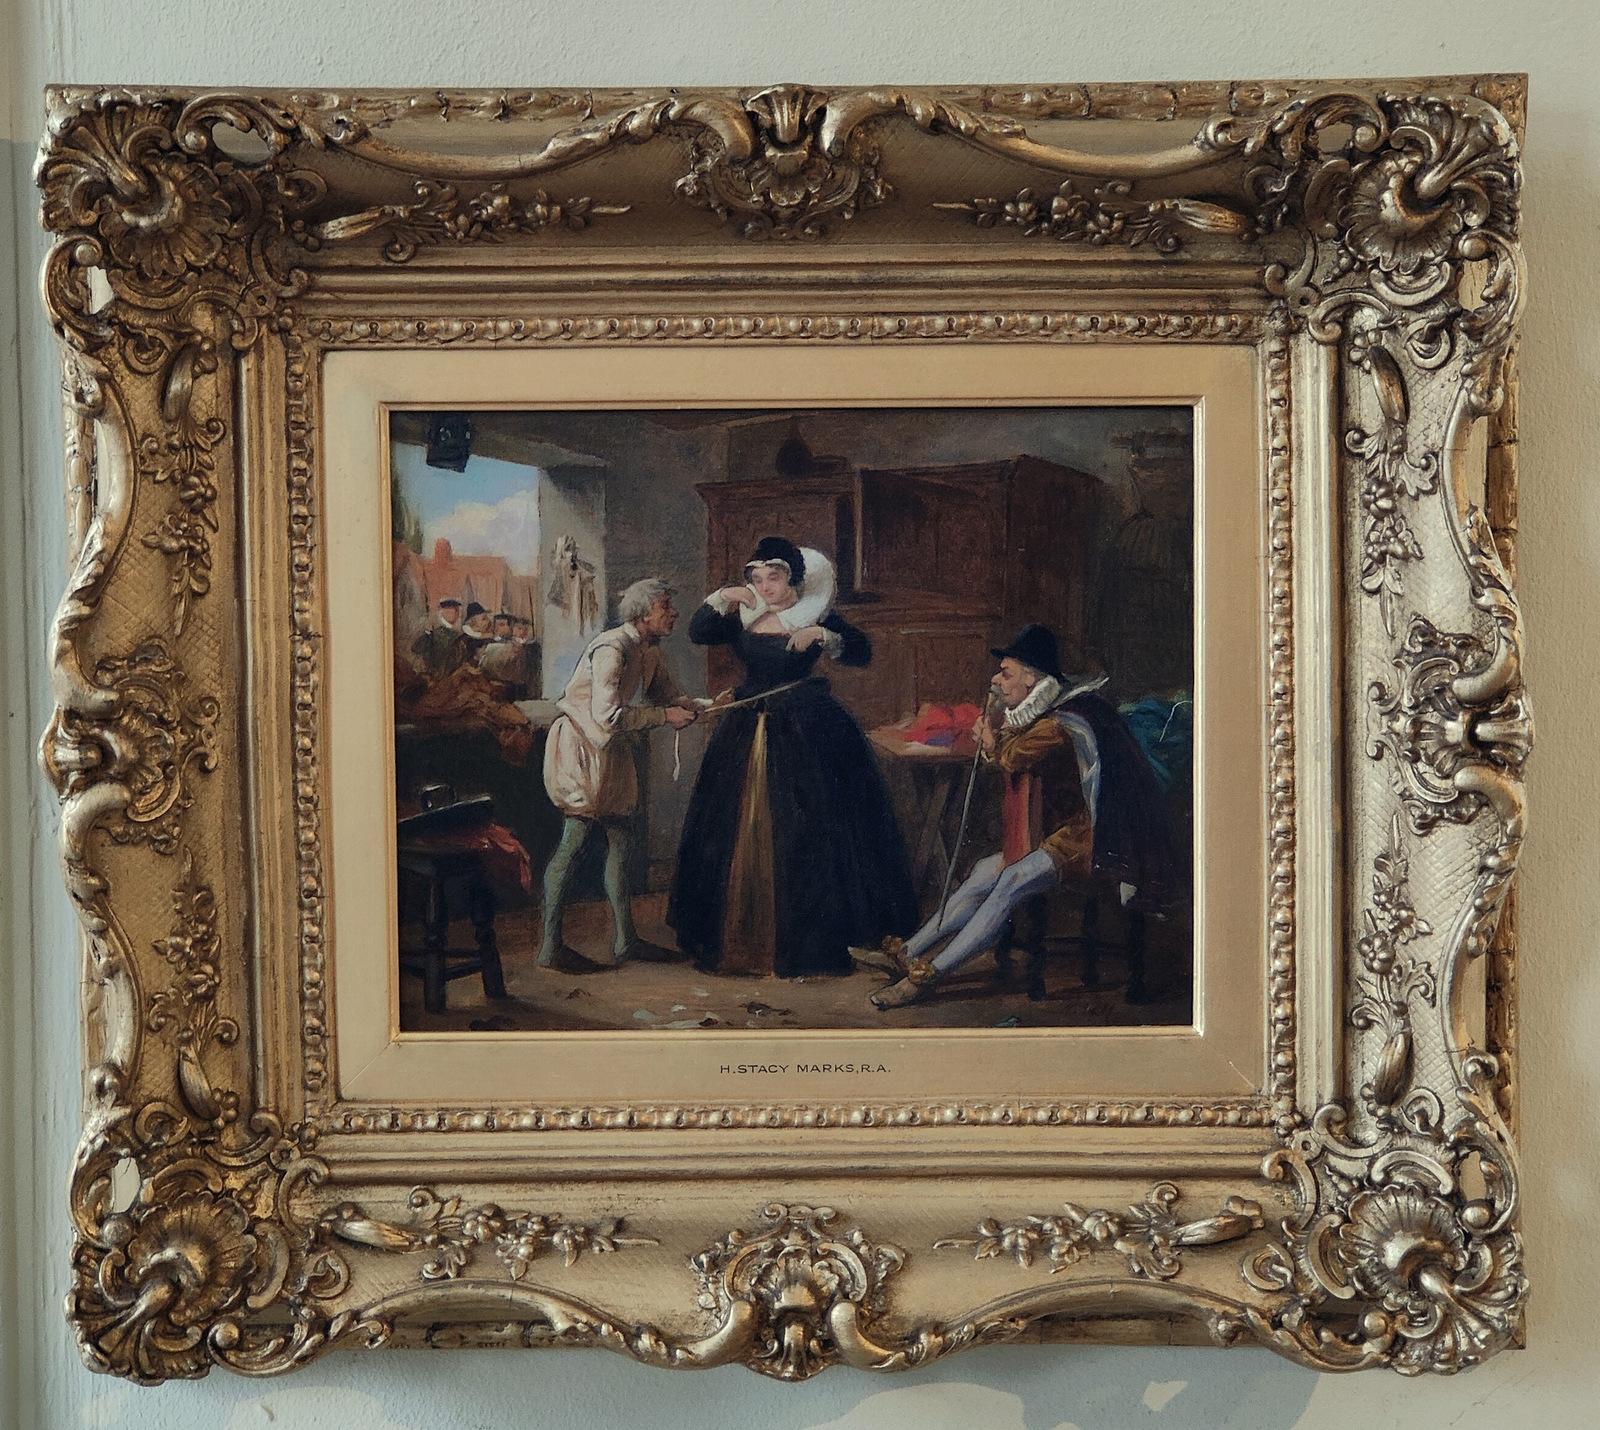 Oil Painting by Henry Stacy Marks  "The Lady's Tailor" 1829 -1898 Leading London painter of life and historical scenes. Member of Royal Academy and St Johns wood clique. Oil on panel. Signed with initials title verso in original frame.

Dimensions